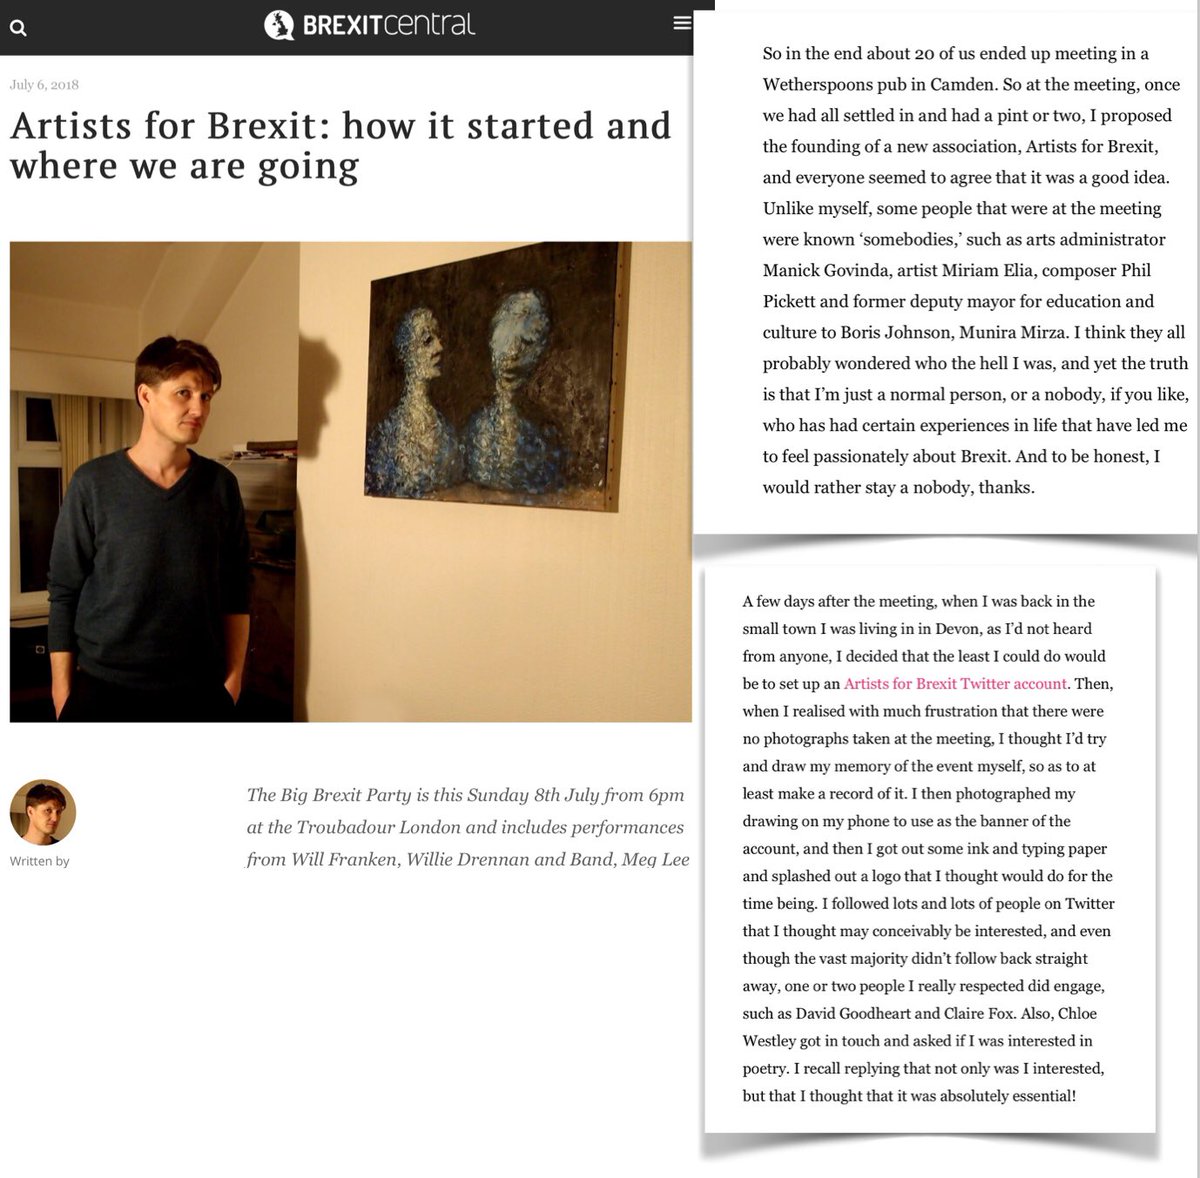 ...Change Britain has an overlapping leadership with Artists For Brexit and Invoke Democracy Now, both of which are dominated by LM veterans. Mirza helped set up AFB and Westley has been involved in it. It is heavily promoted by BrexitCentral.  https://brexitcentral.com/artists-brexit-started-going/